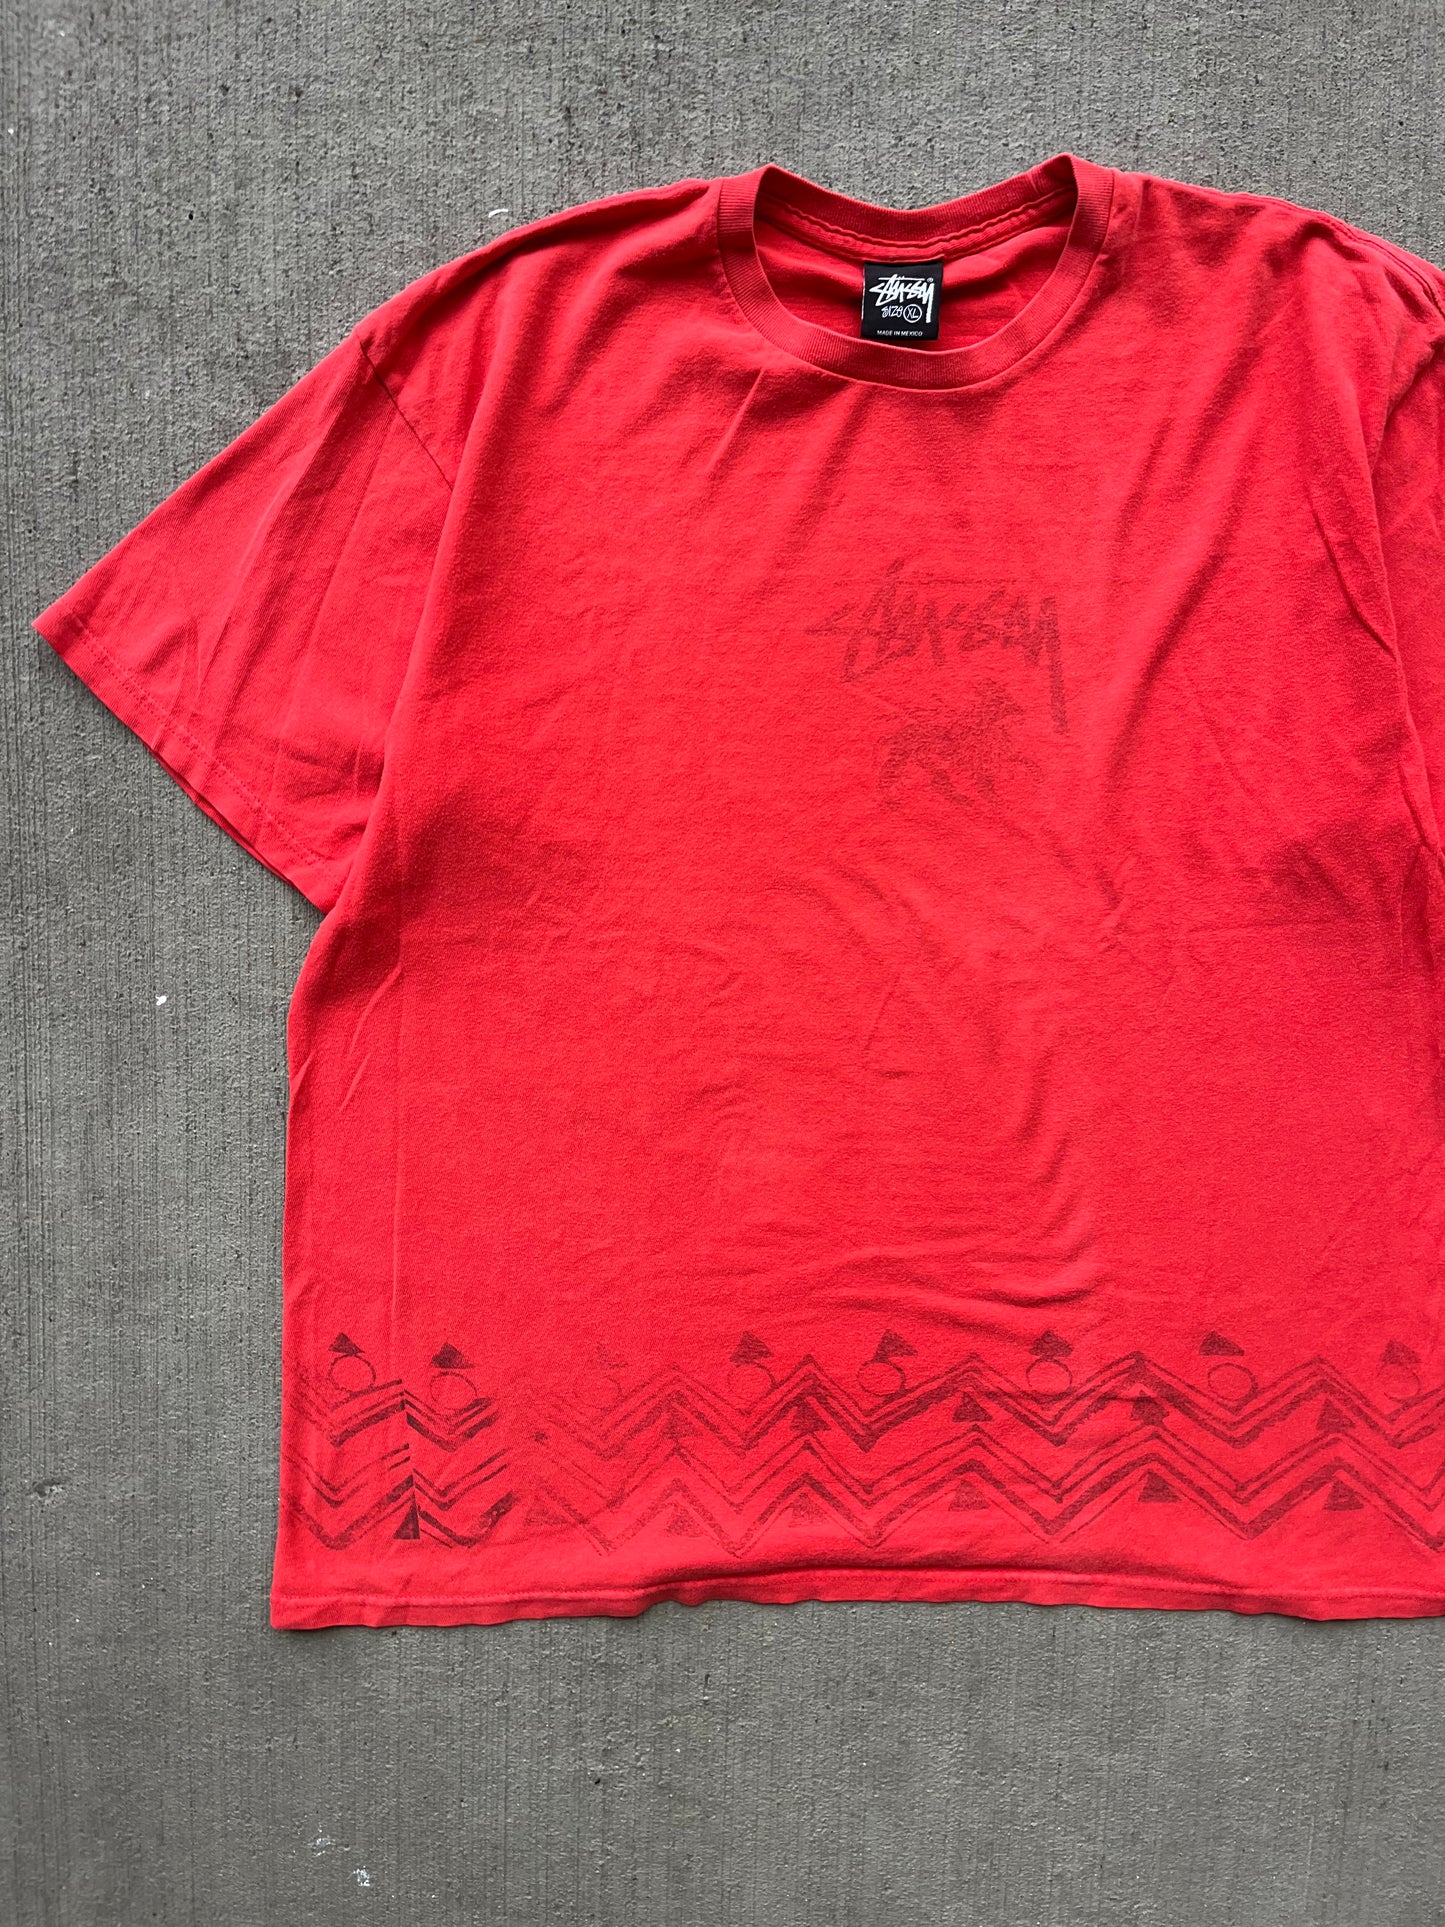 (XL) 2000s Stussy Tribe Griffin Tee